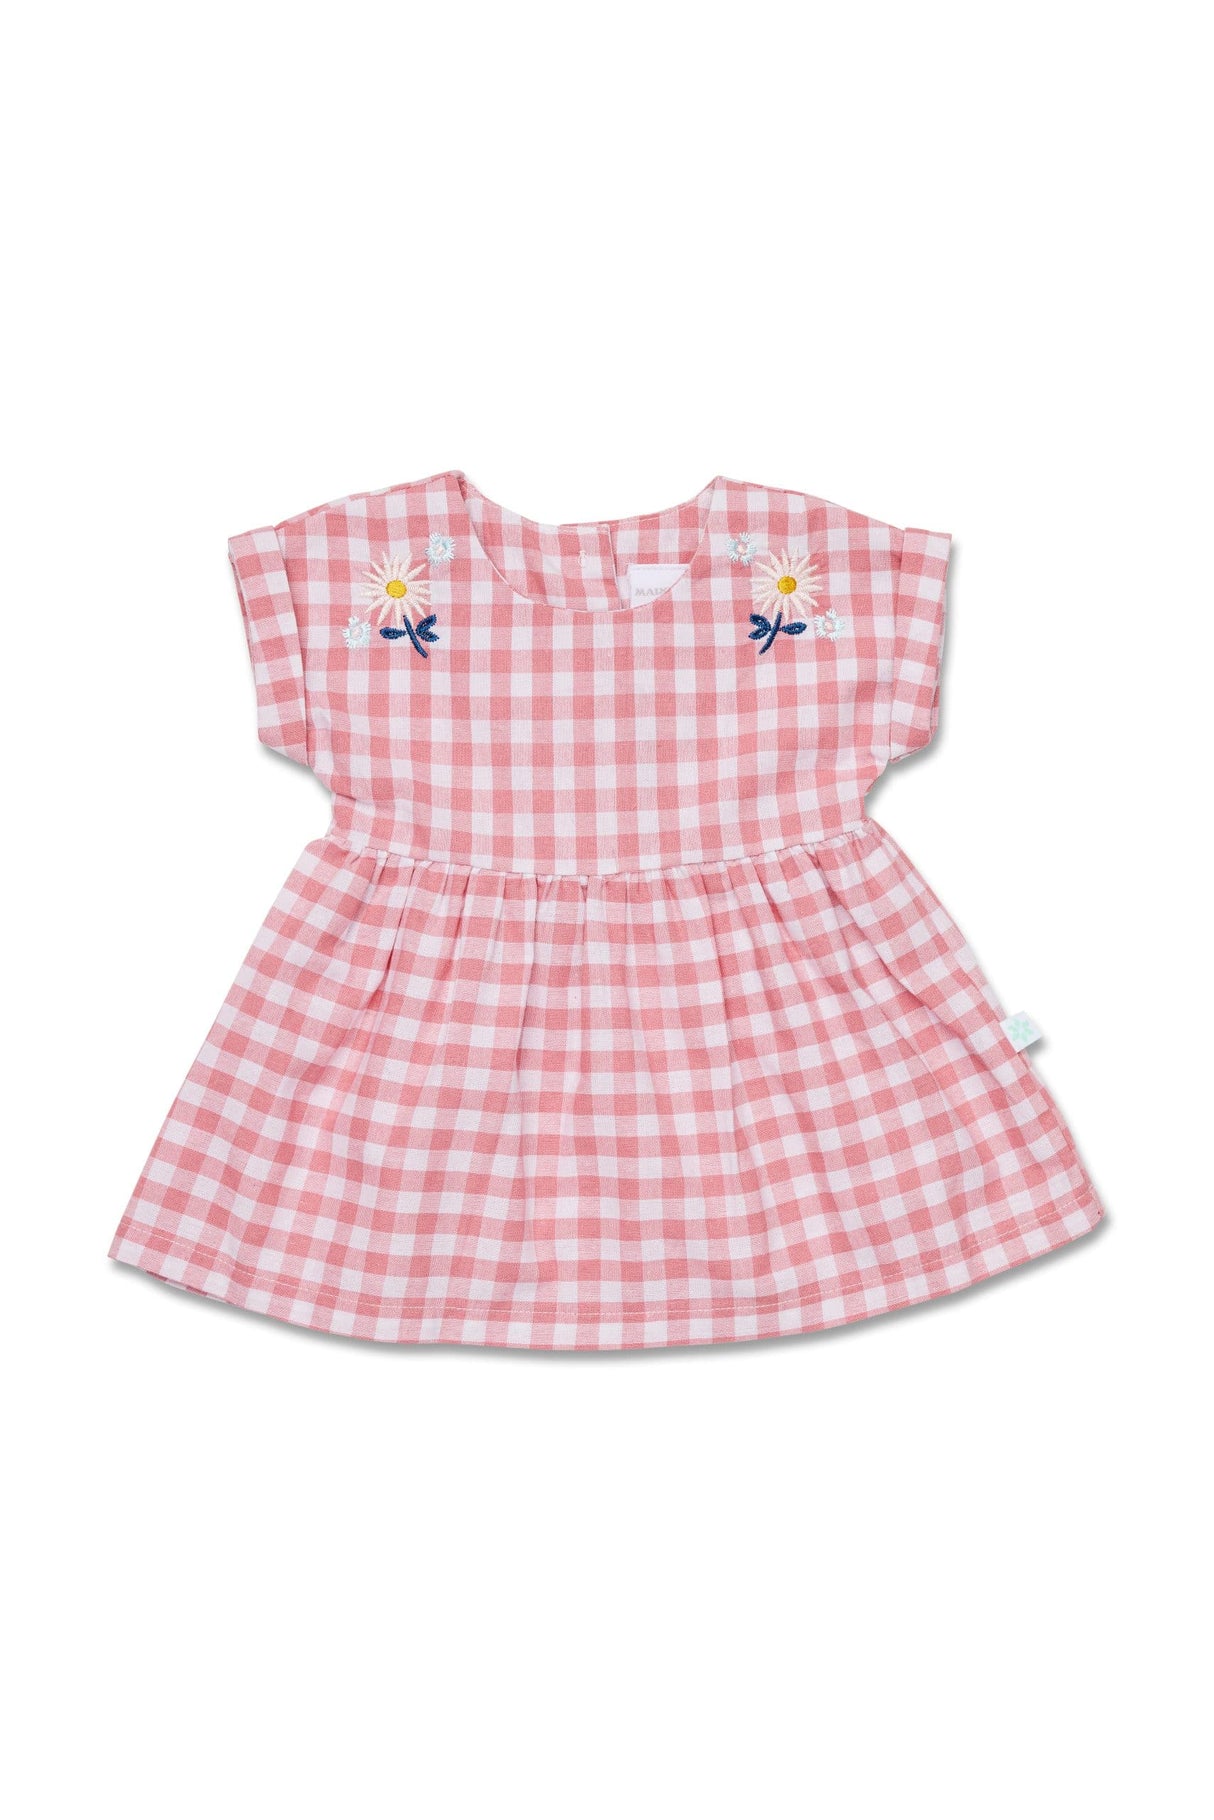 Marquise Daisy Chain Floral Gingham Dress